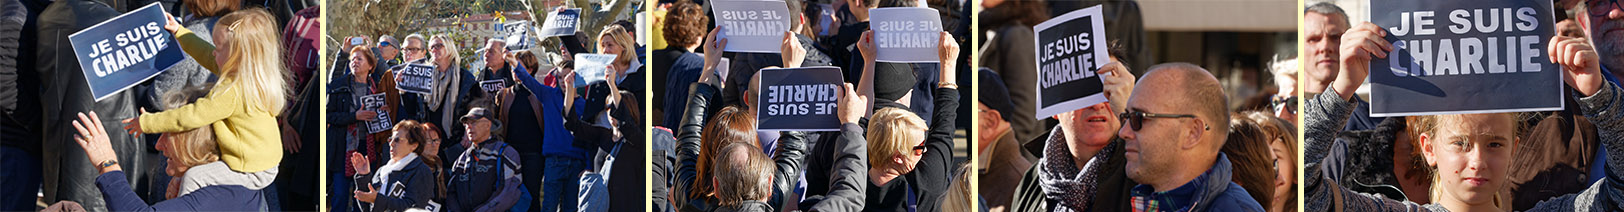 'Je suis Charlie' gathering in Cannes on Sunday, January 11, 2015